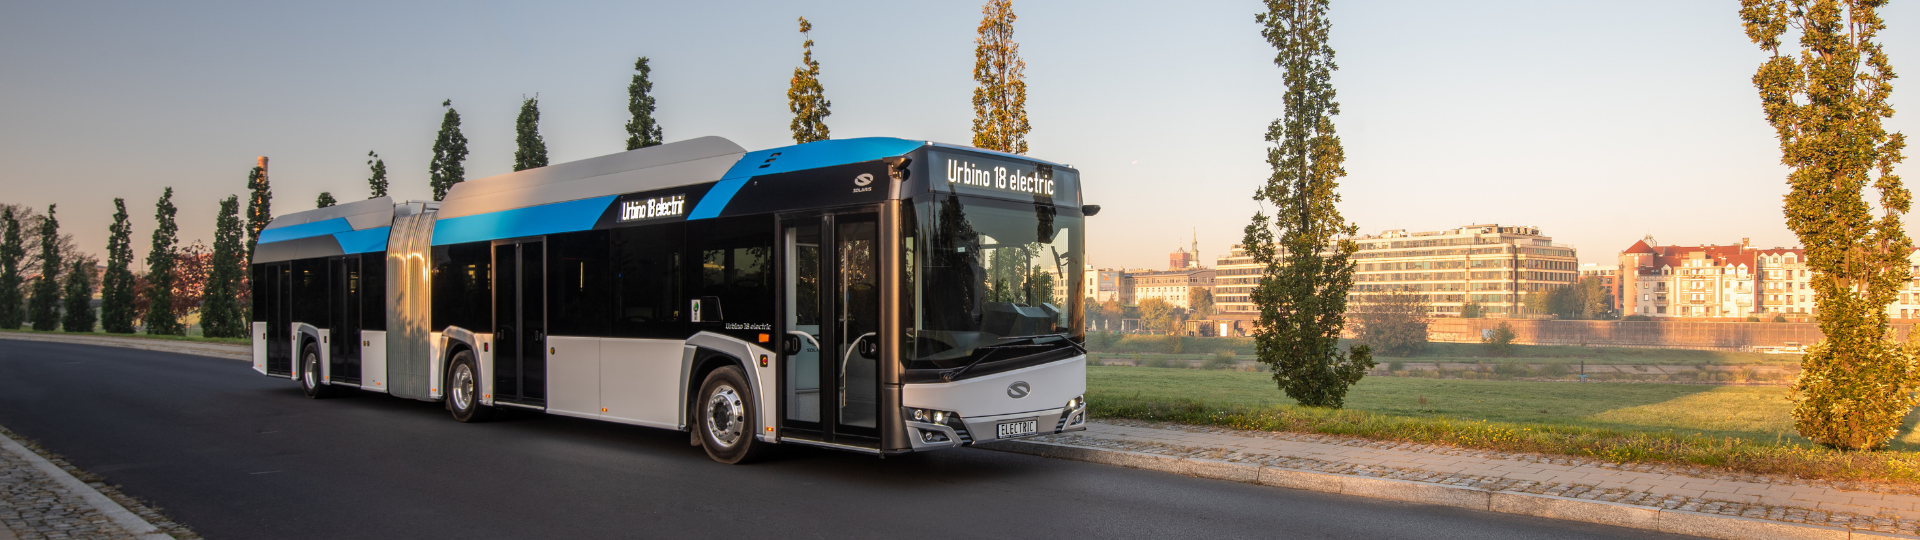 Lublin opts for Solaris e-buses once again